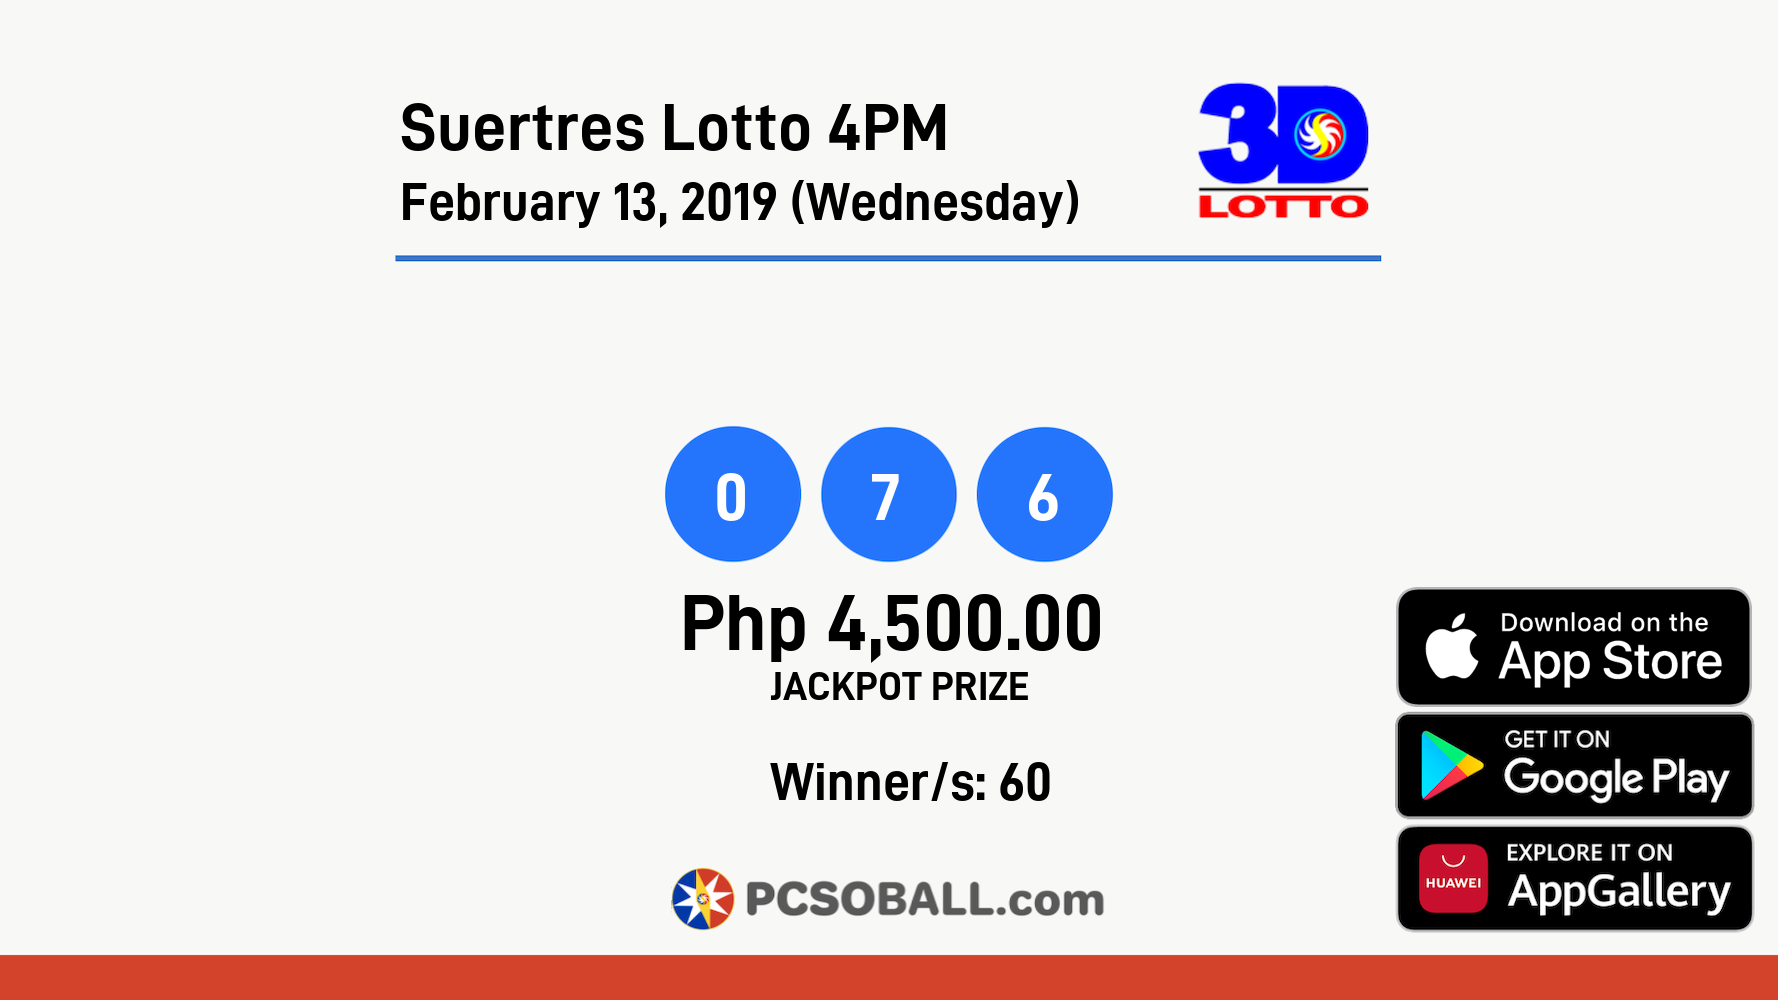 Suertres Lotto 4PM February 13, 2019 (Wednesday) Result